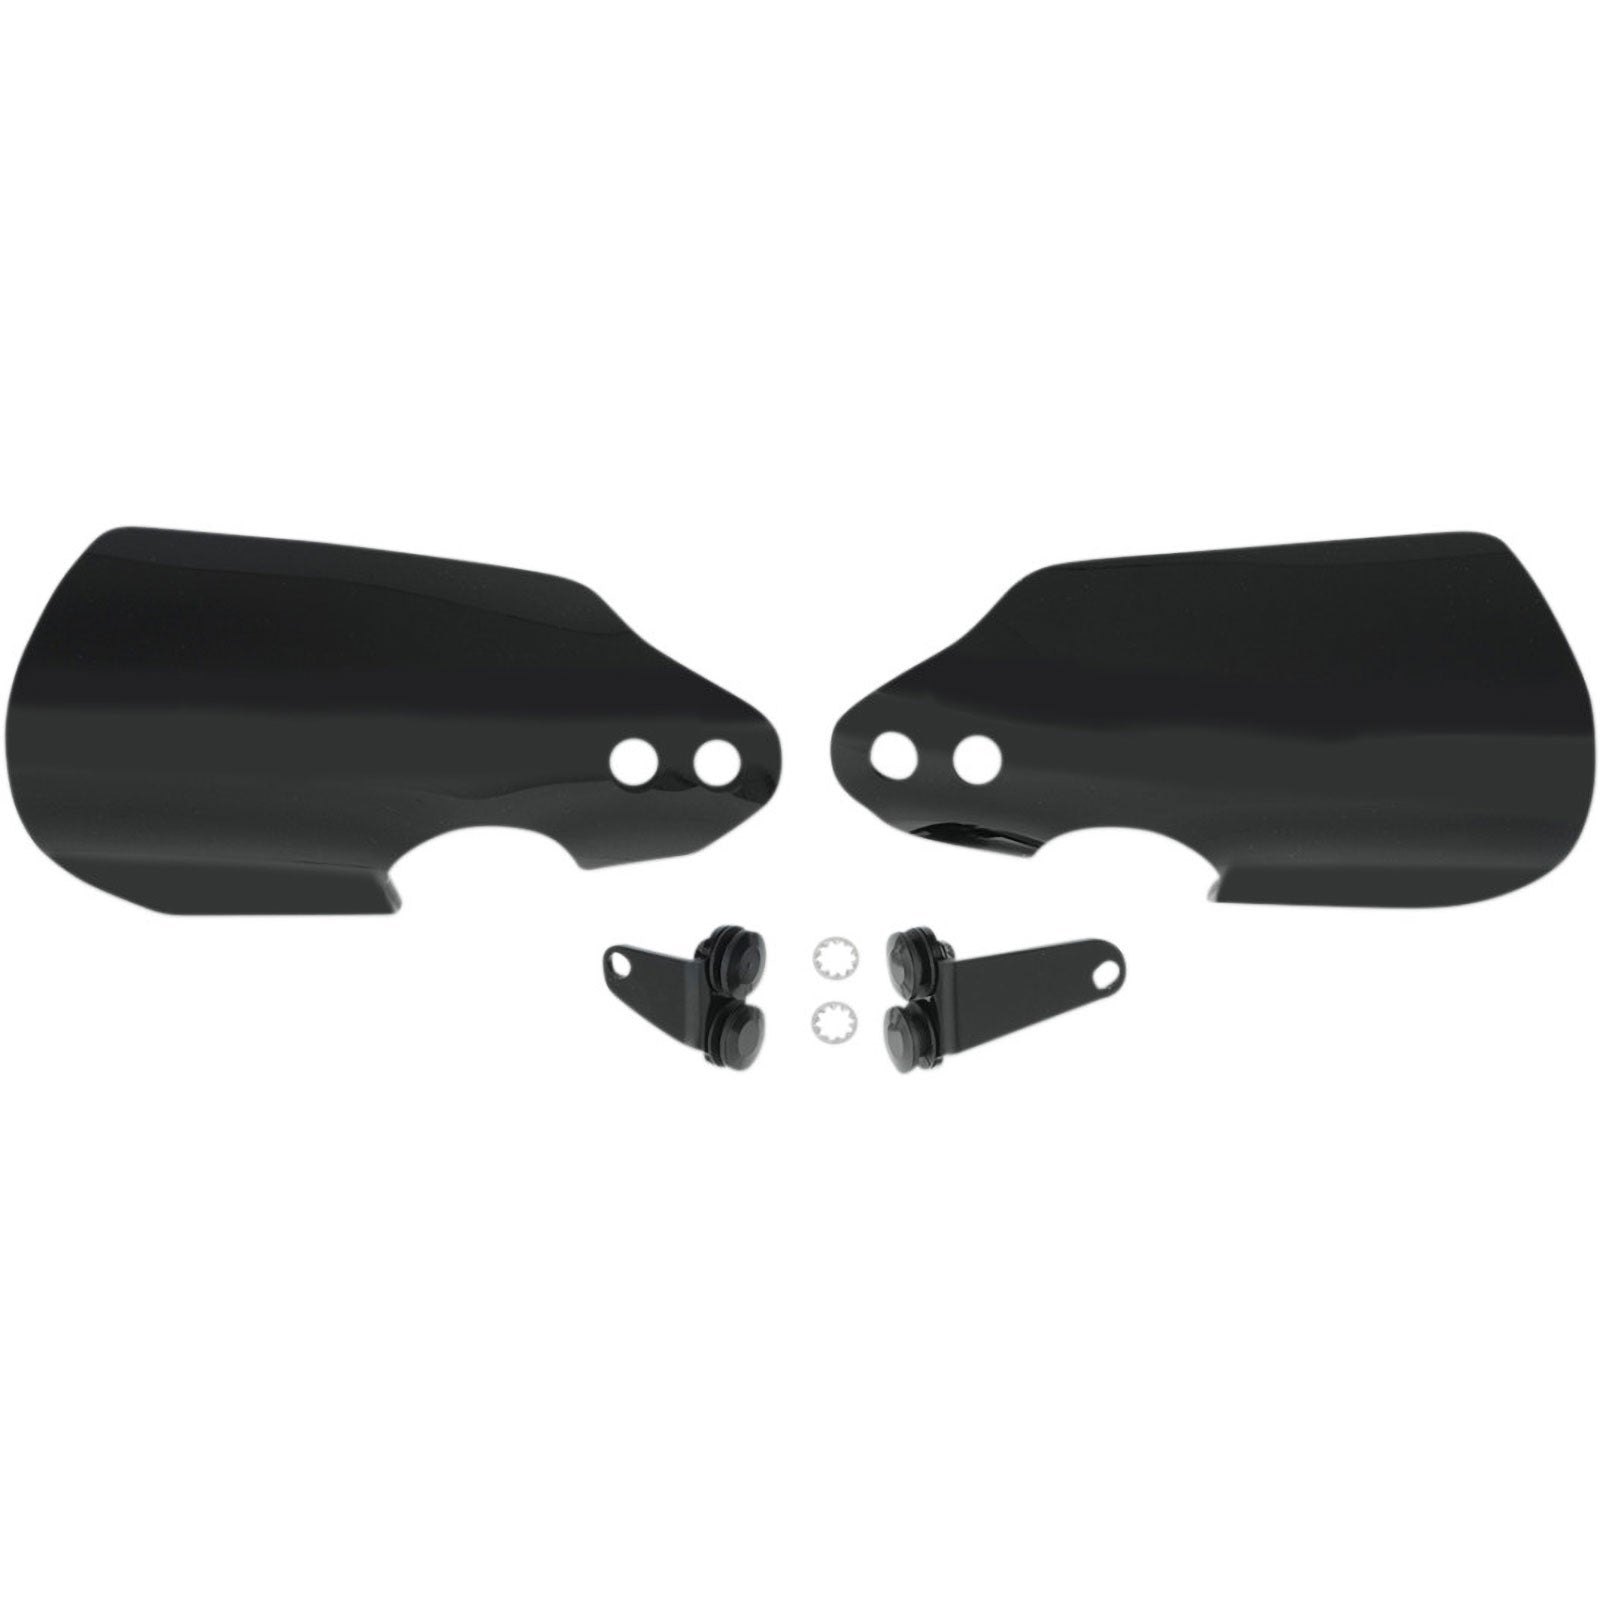 Memphis Shades MEB7221 Handguards Motorcycle Accessories-0635